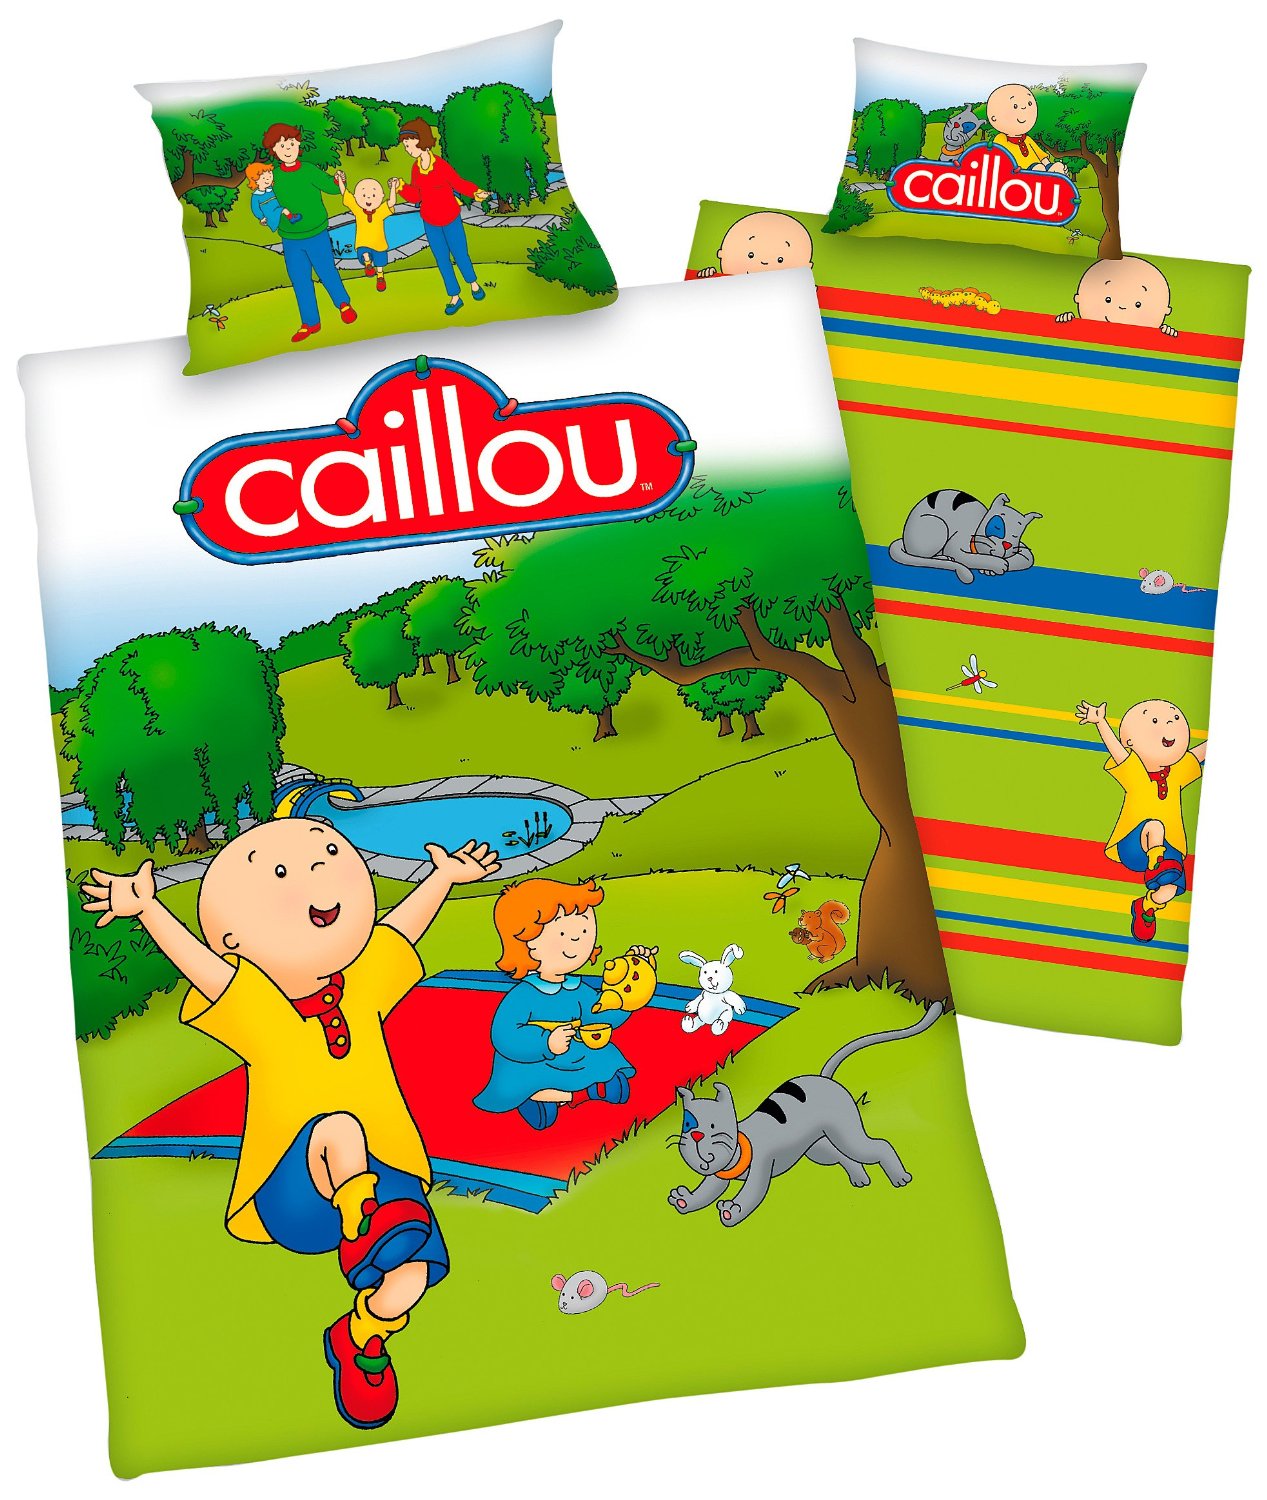 Caillou bed